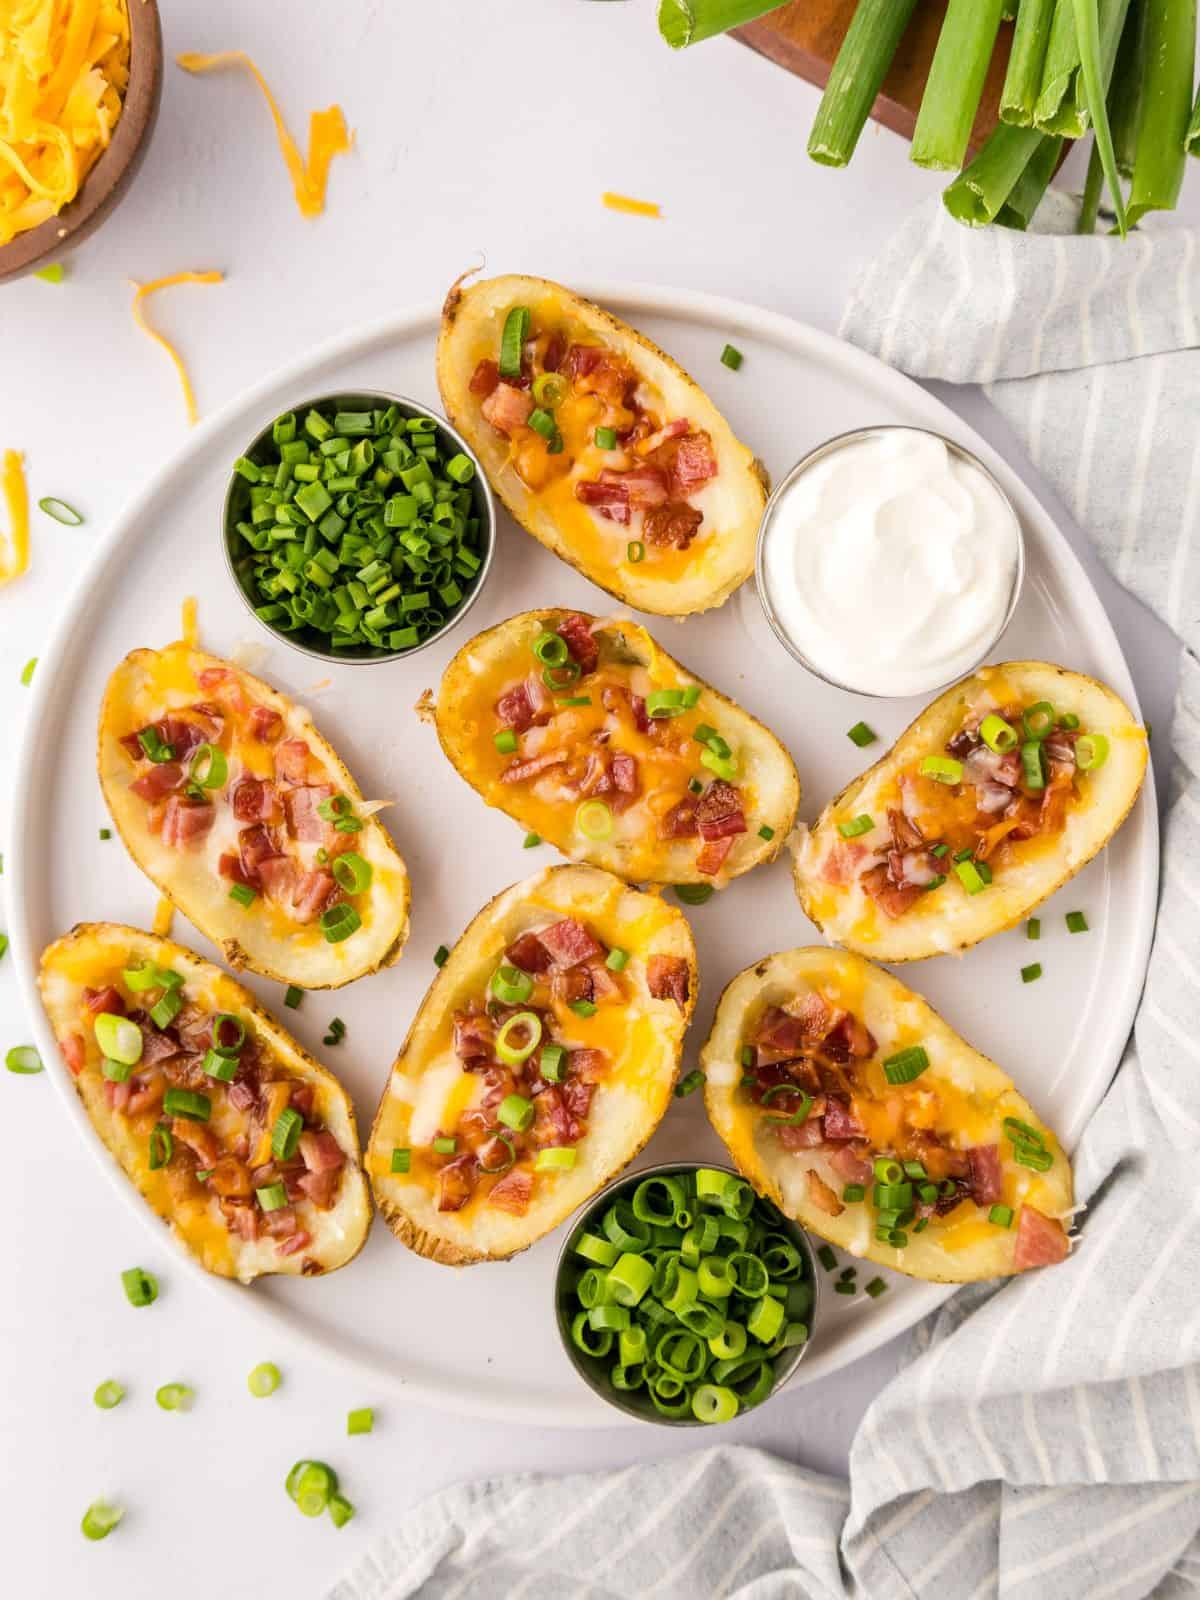 Loaded potato skins on white platter served with green onions and a dish of sour cream on the side.